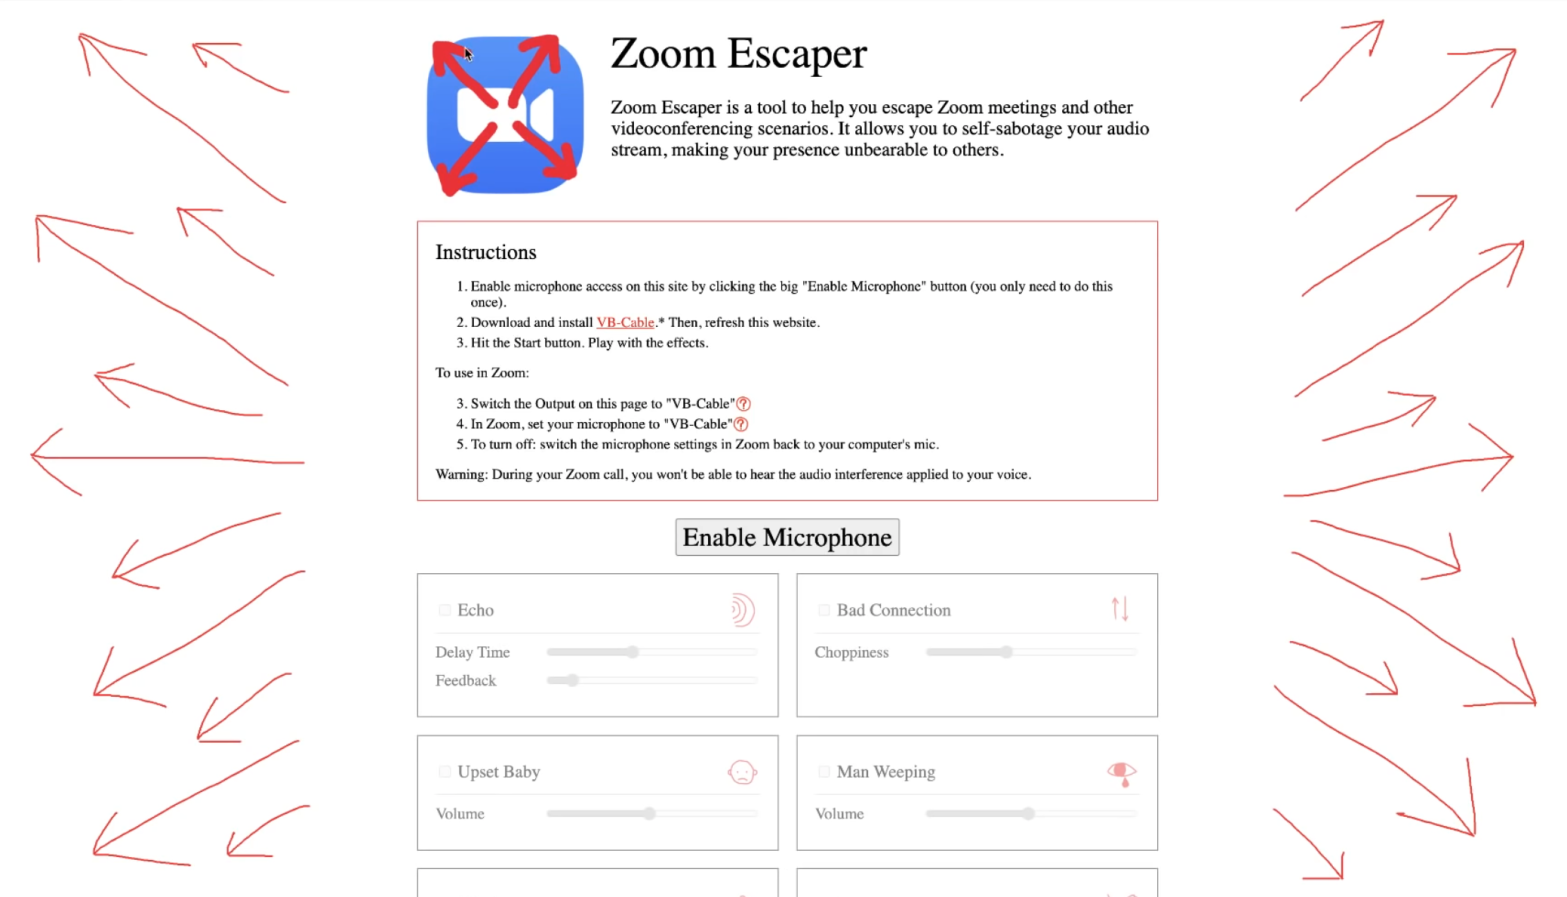 Zoom Escaper is a web tool that helps you sabotage video calls